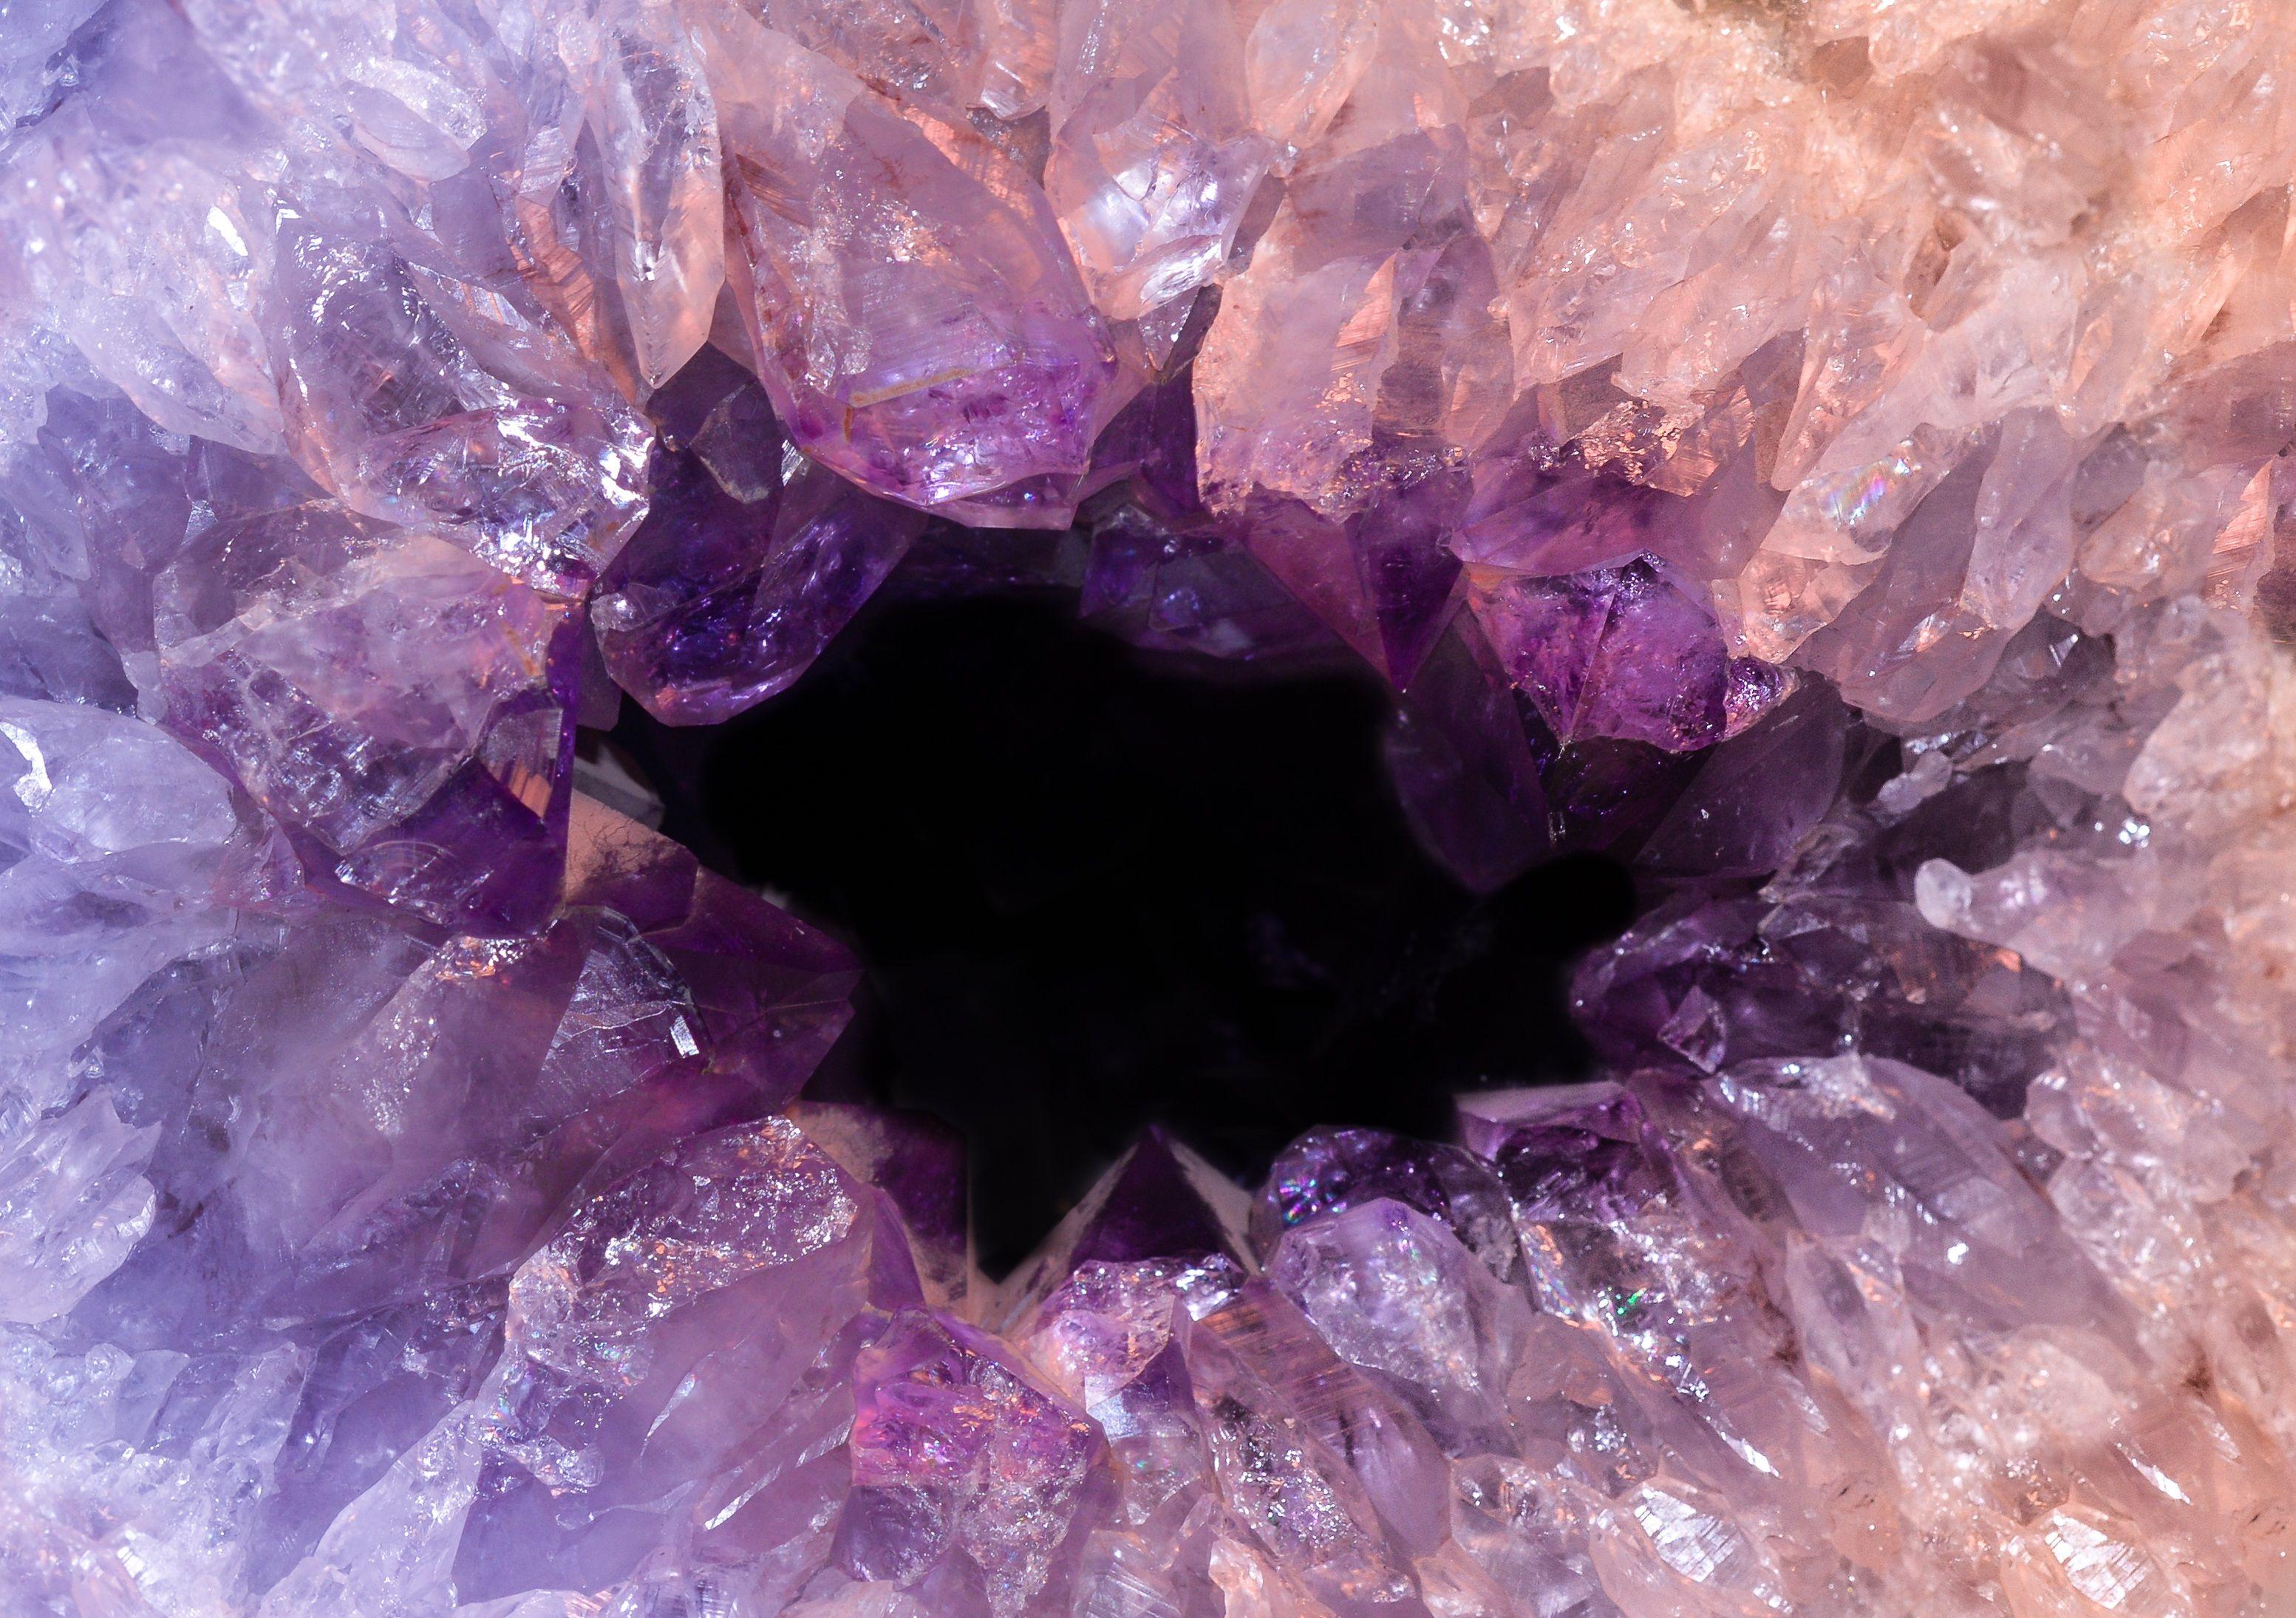 Amethyst is a violet variety of quartz often used in jewelry. Full